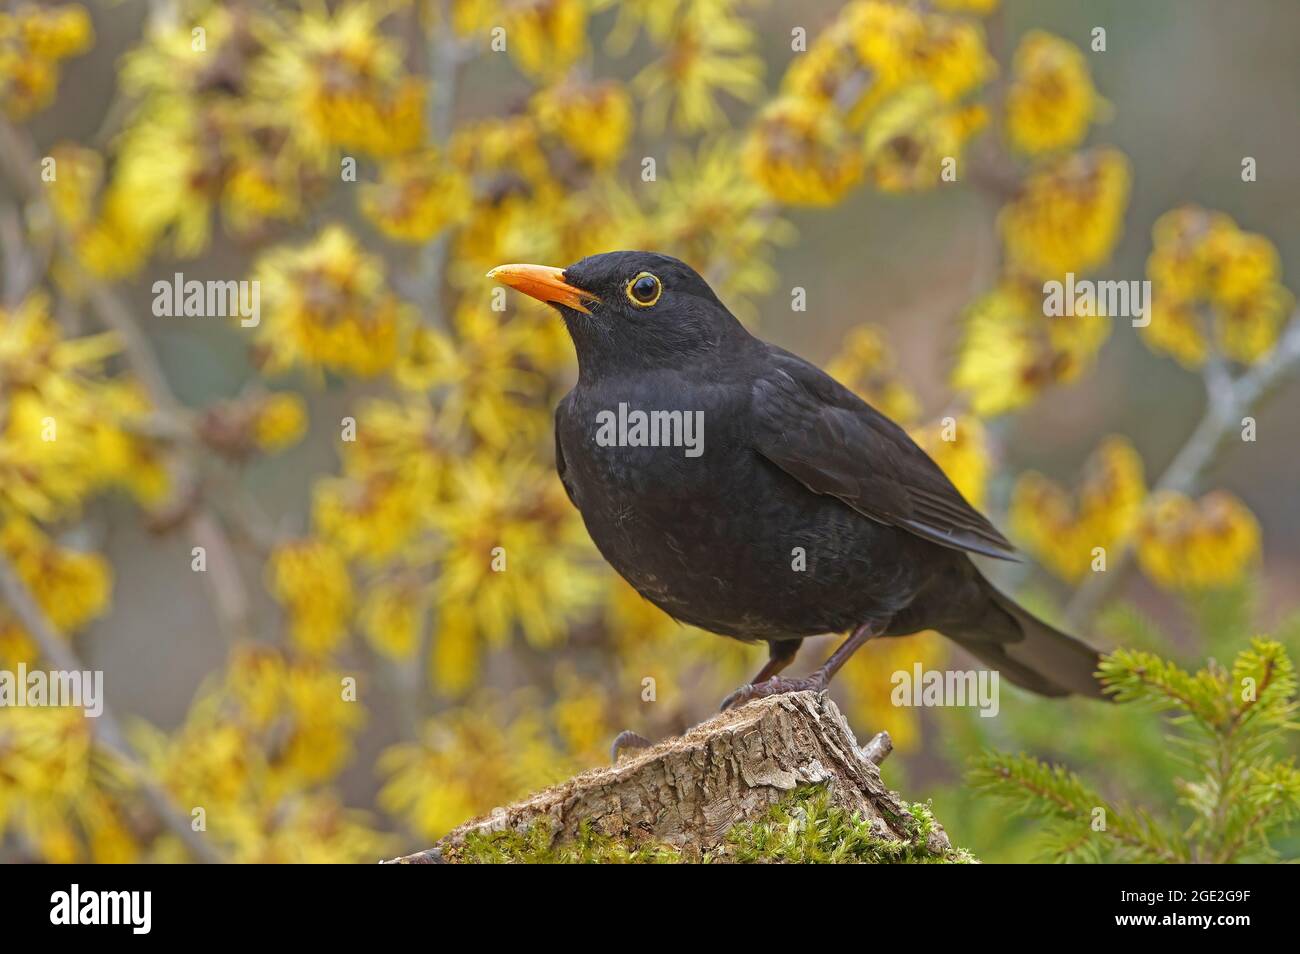 Eurasian Blackbird (Turdus merula). Adult male standing on mossy log, with flowering Witch Hazel in background. Germany Stock Photo